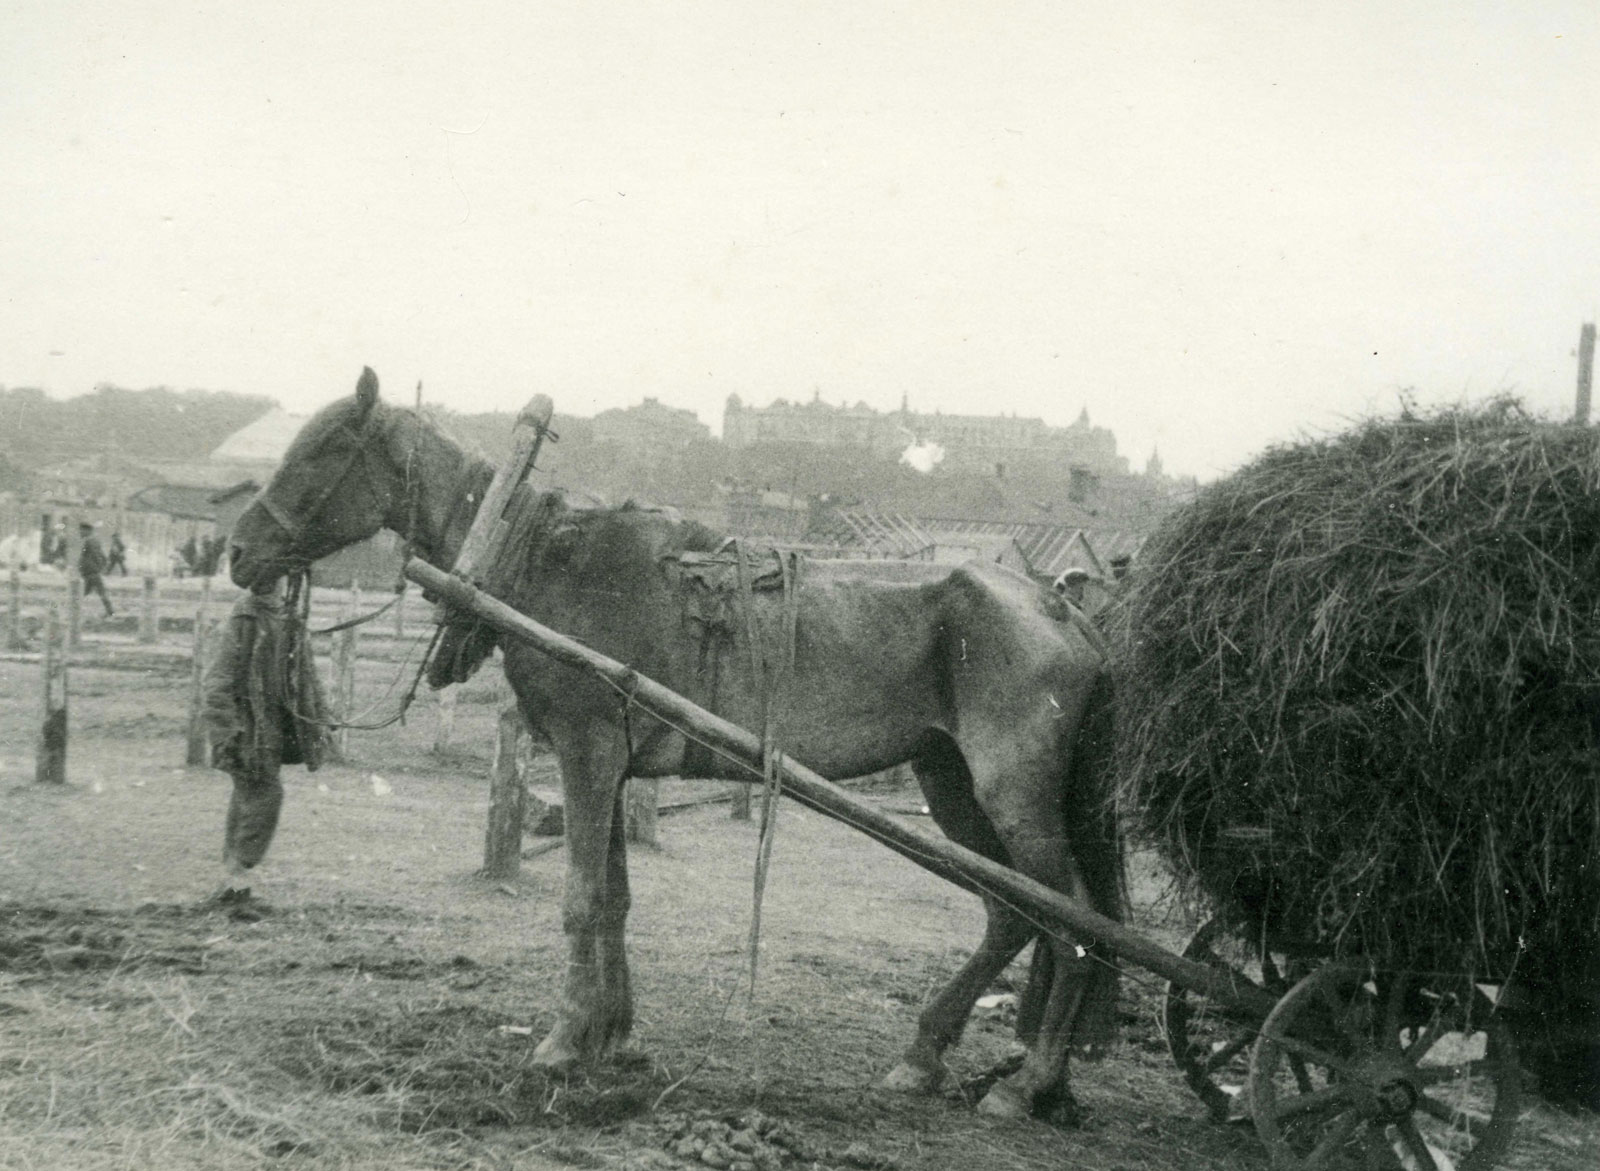 A black and white of a photo with its ribs showing, hooked up to a cart filled with plant matter.